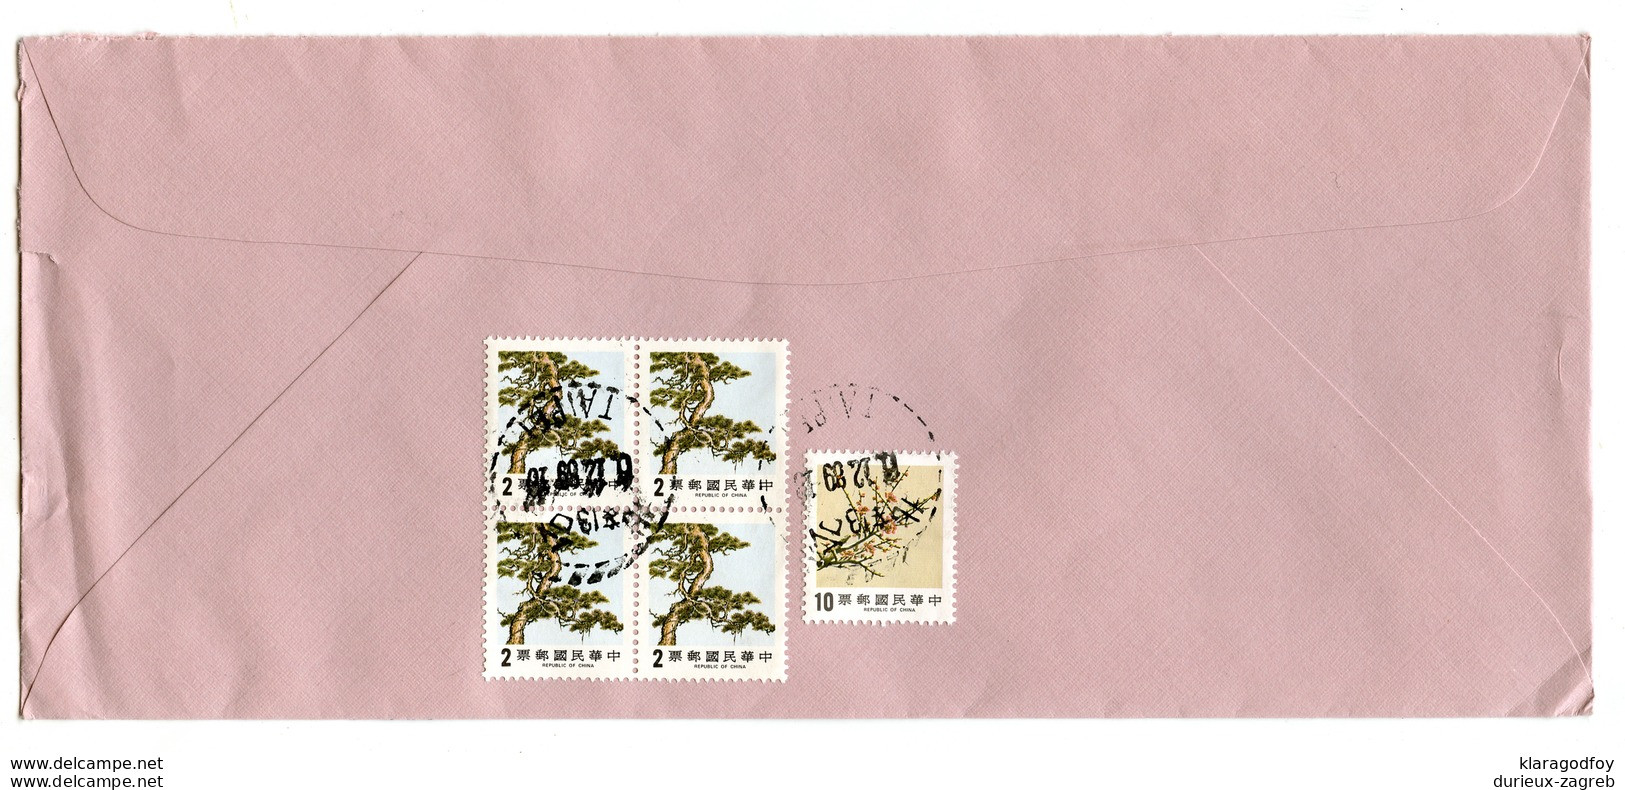 Ultimate Performance Inc. Taipei Company Letter Cover Posted 1989 To Germany B200120 - Storia Postale